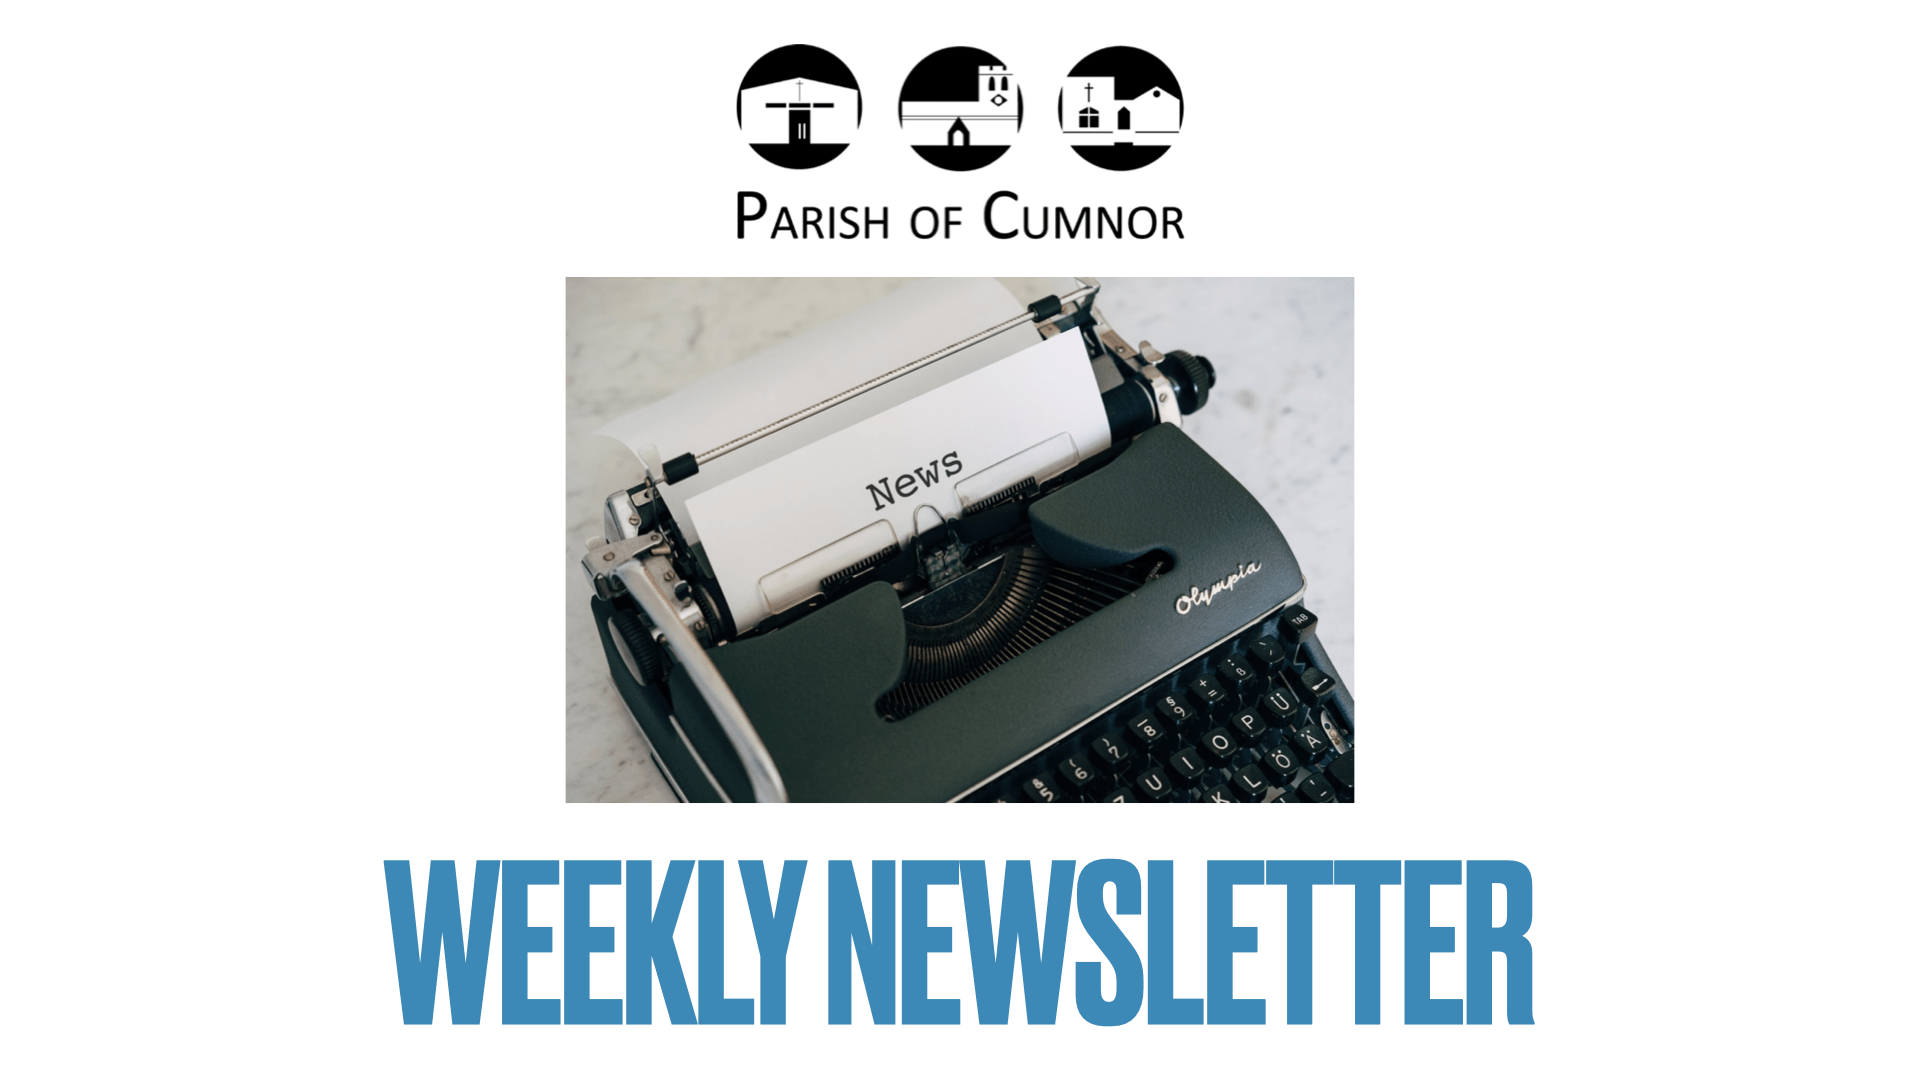 Newsletter for Sunday 28th March 2021